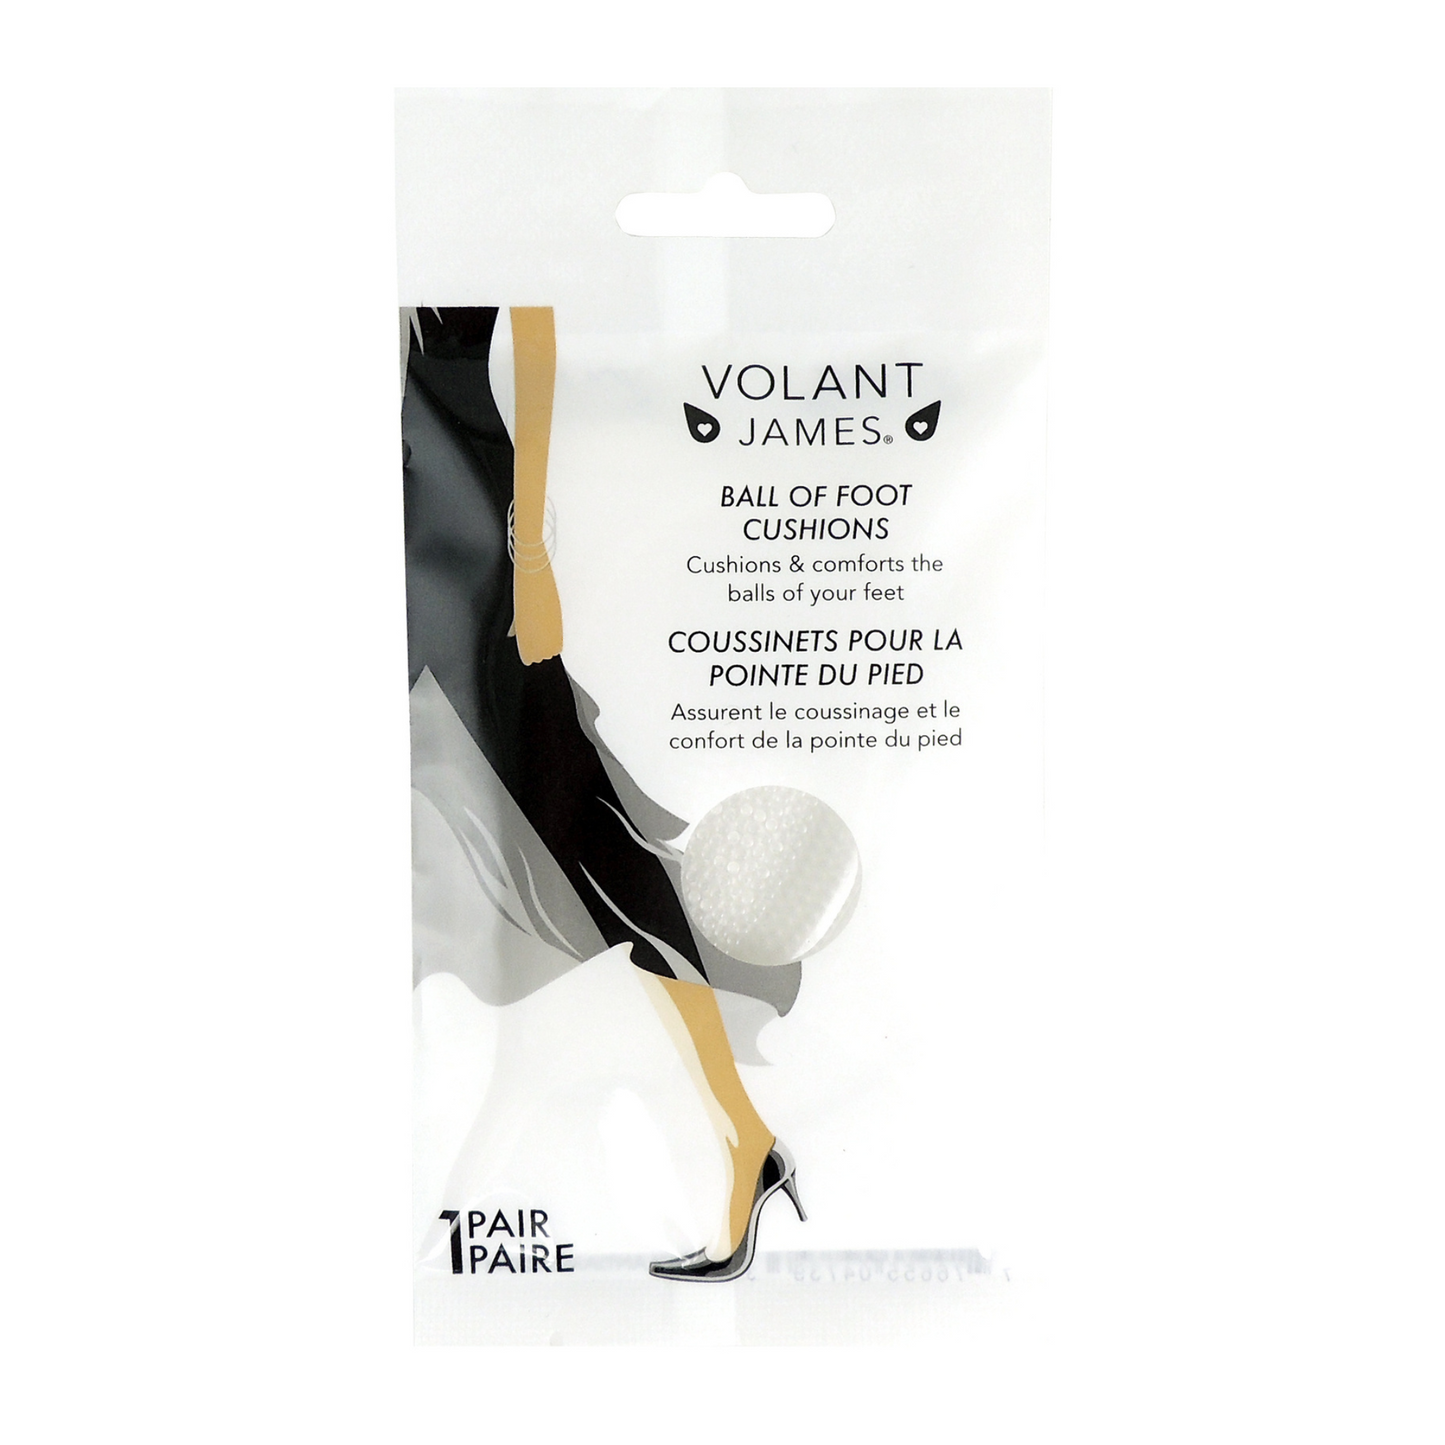 A front view of a package of Volant James clear ball of foot cushions.